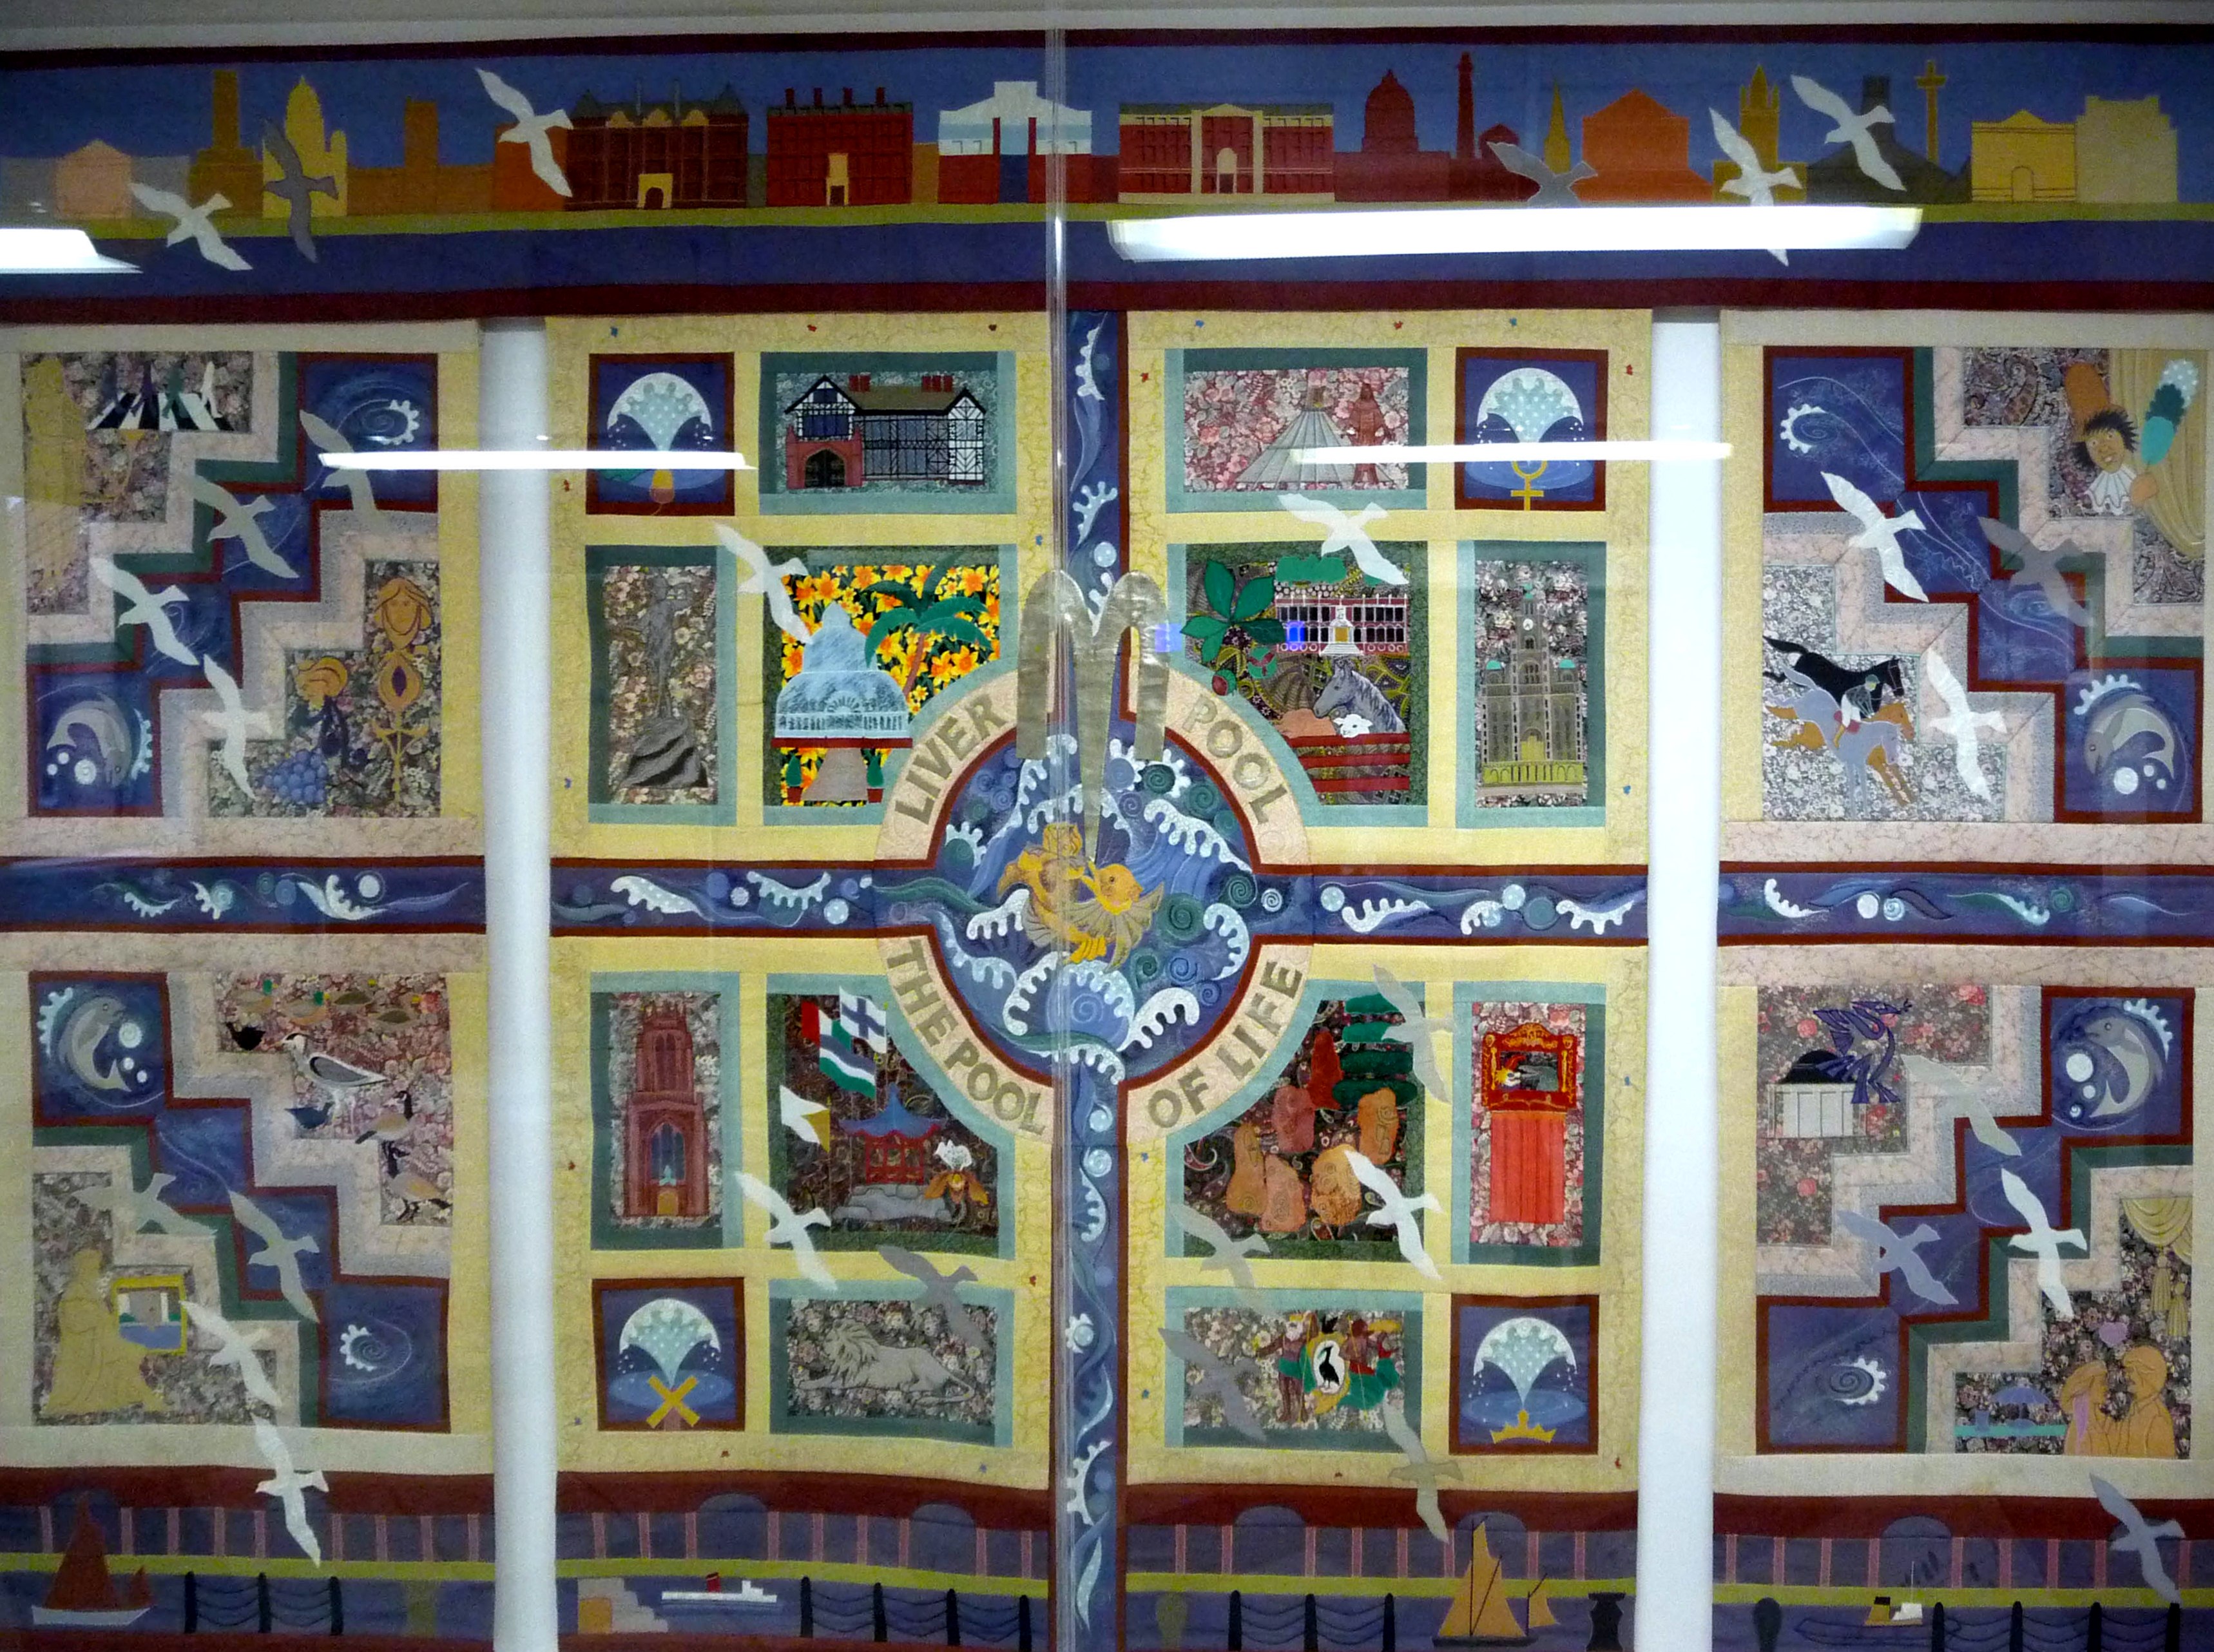 "The Pool of Life Wall Hanging" by Norma Heron, 1995